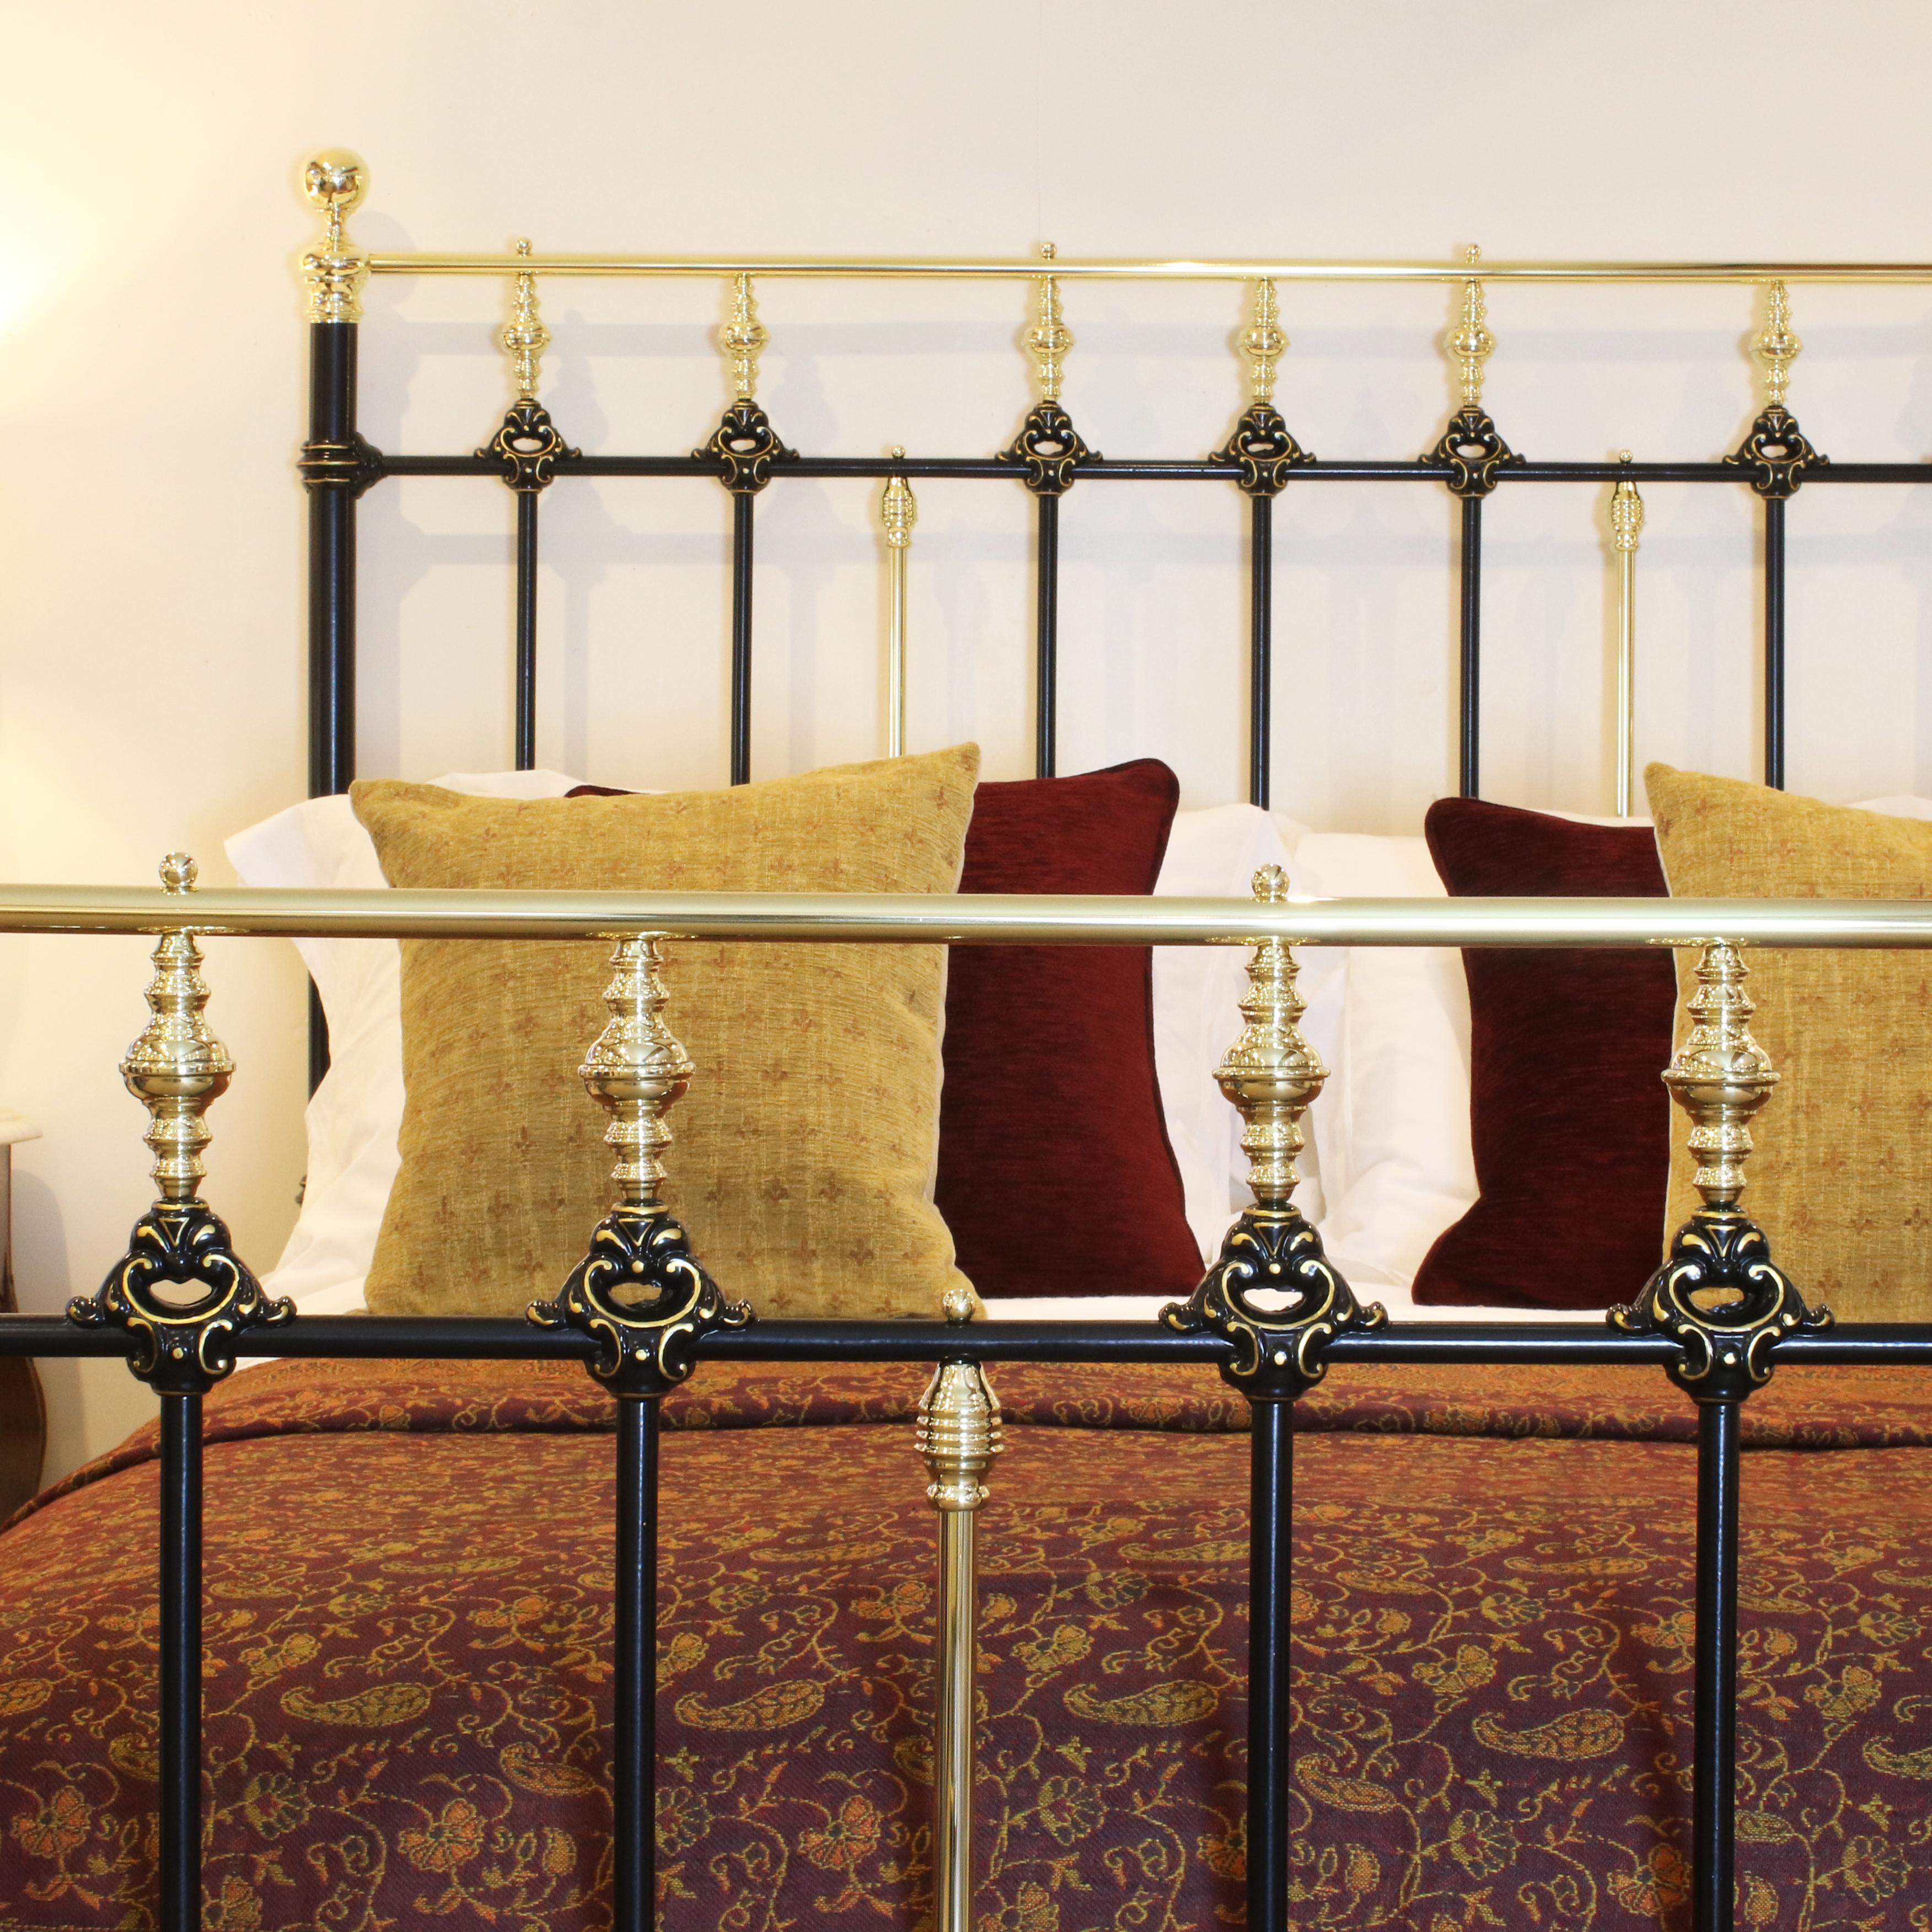 Cast Decorative Brass and Iron Bed in Black, MK164